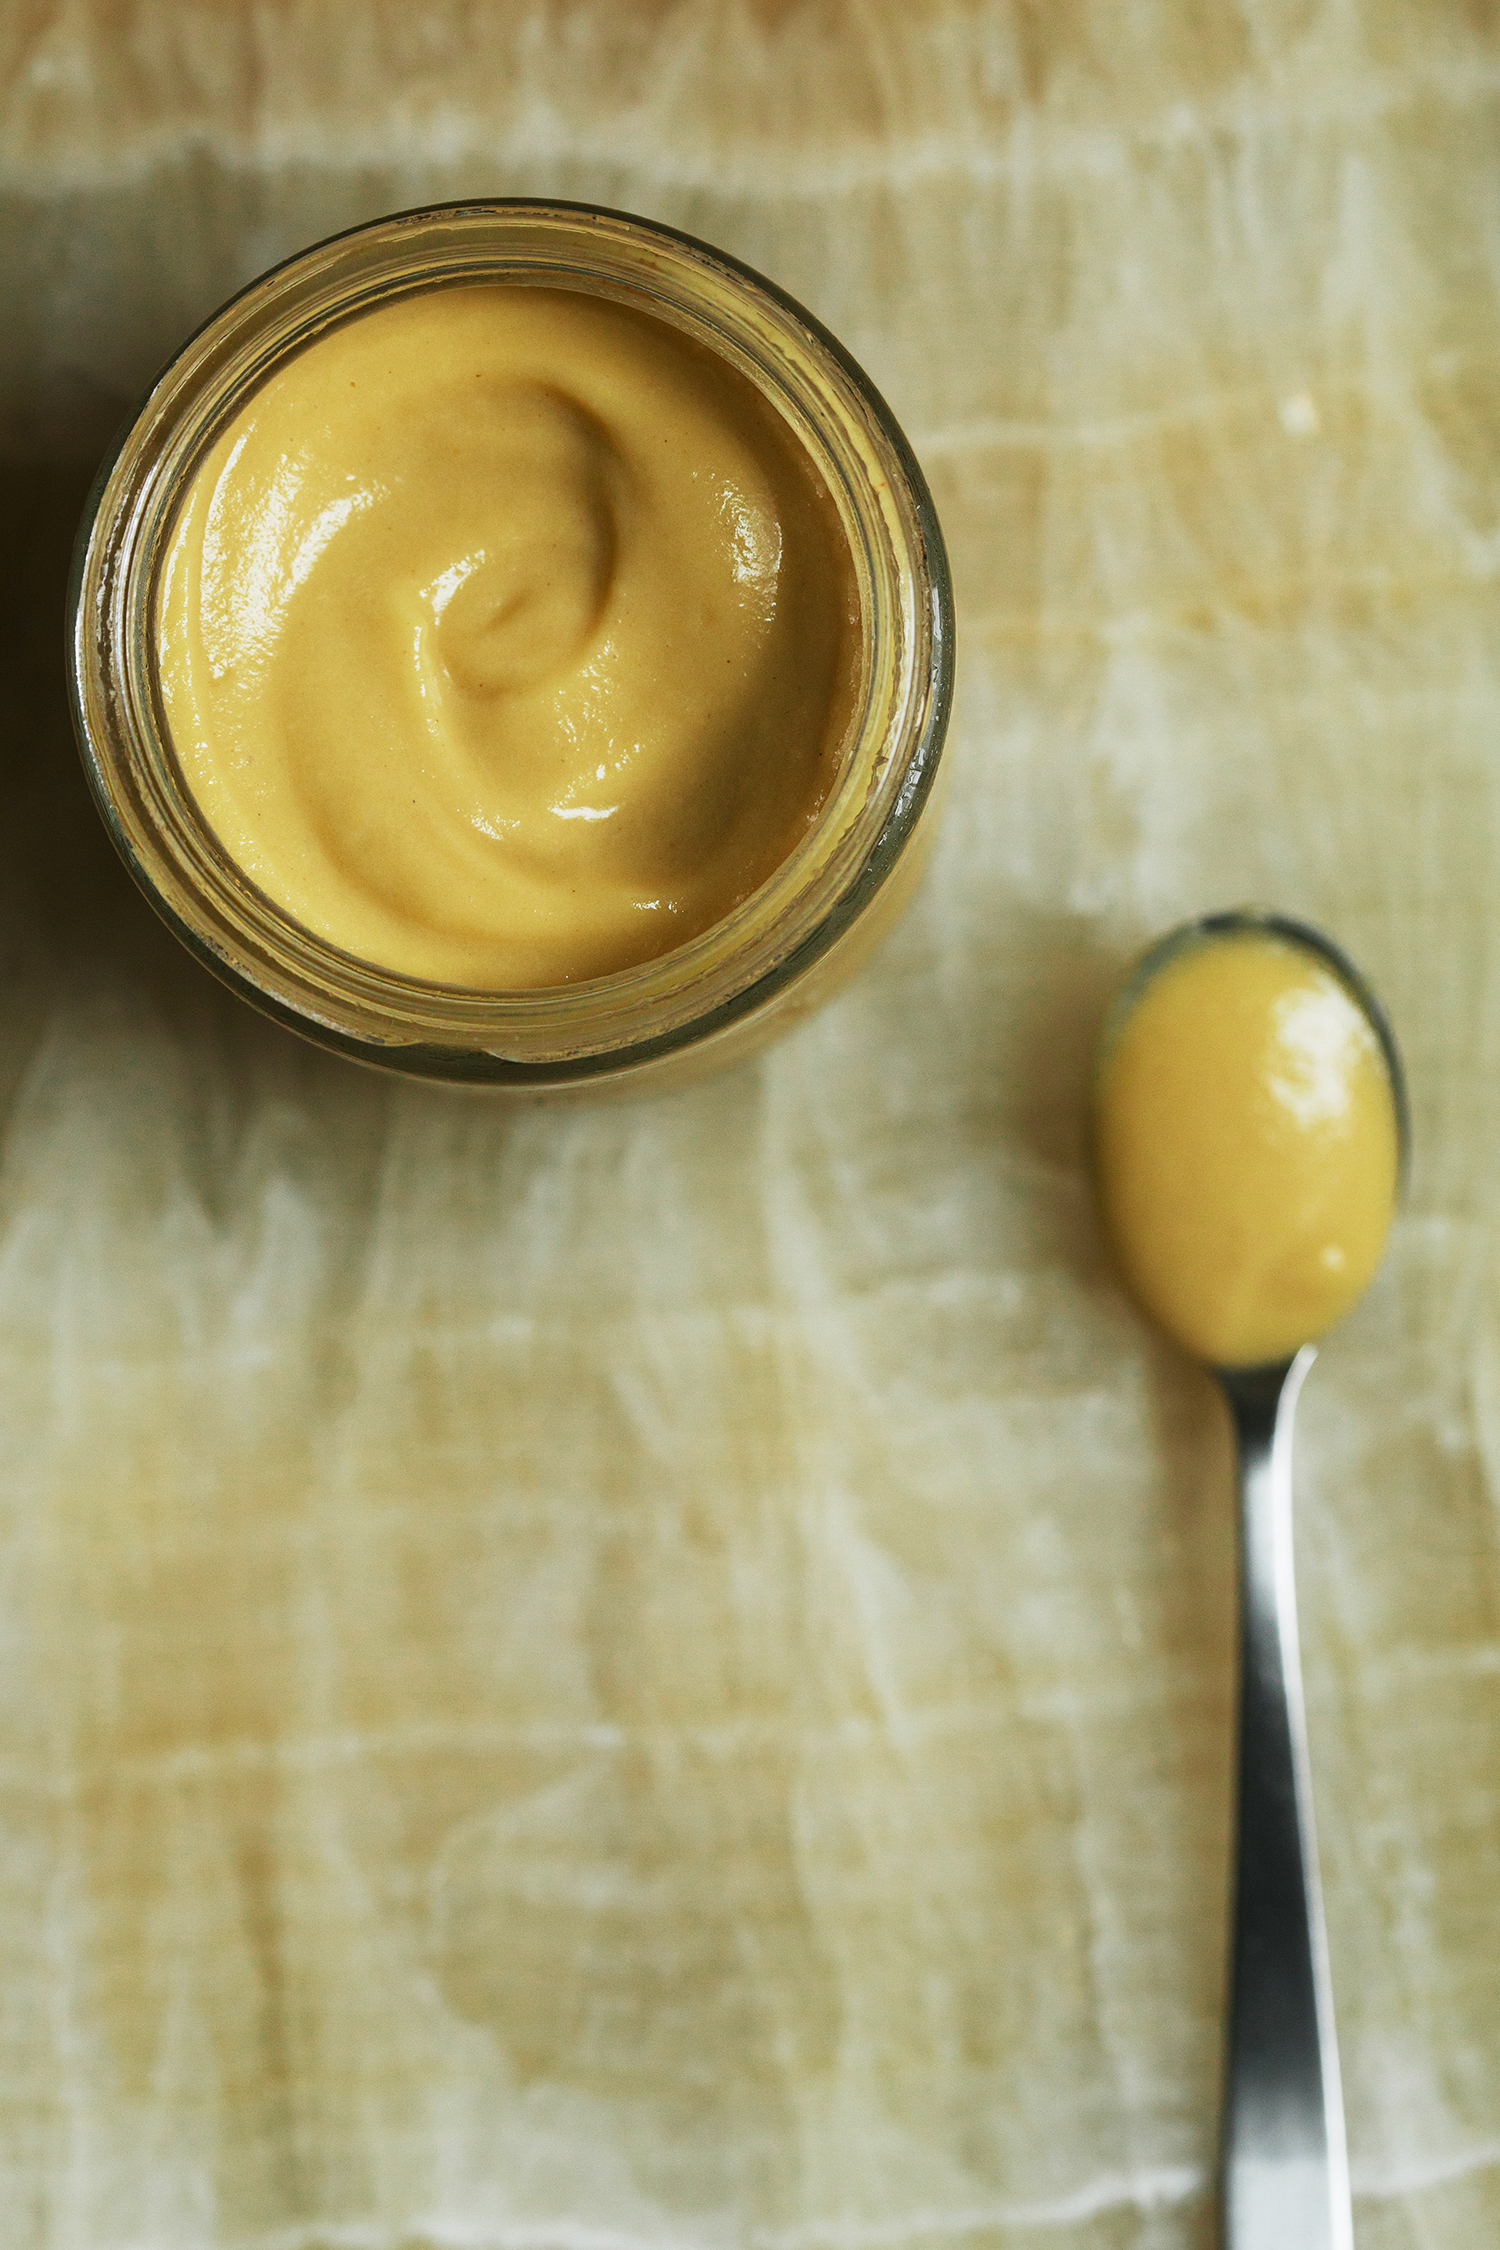 Apple Miso Mayo from Simply Vibrant cookbook